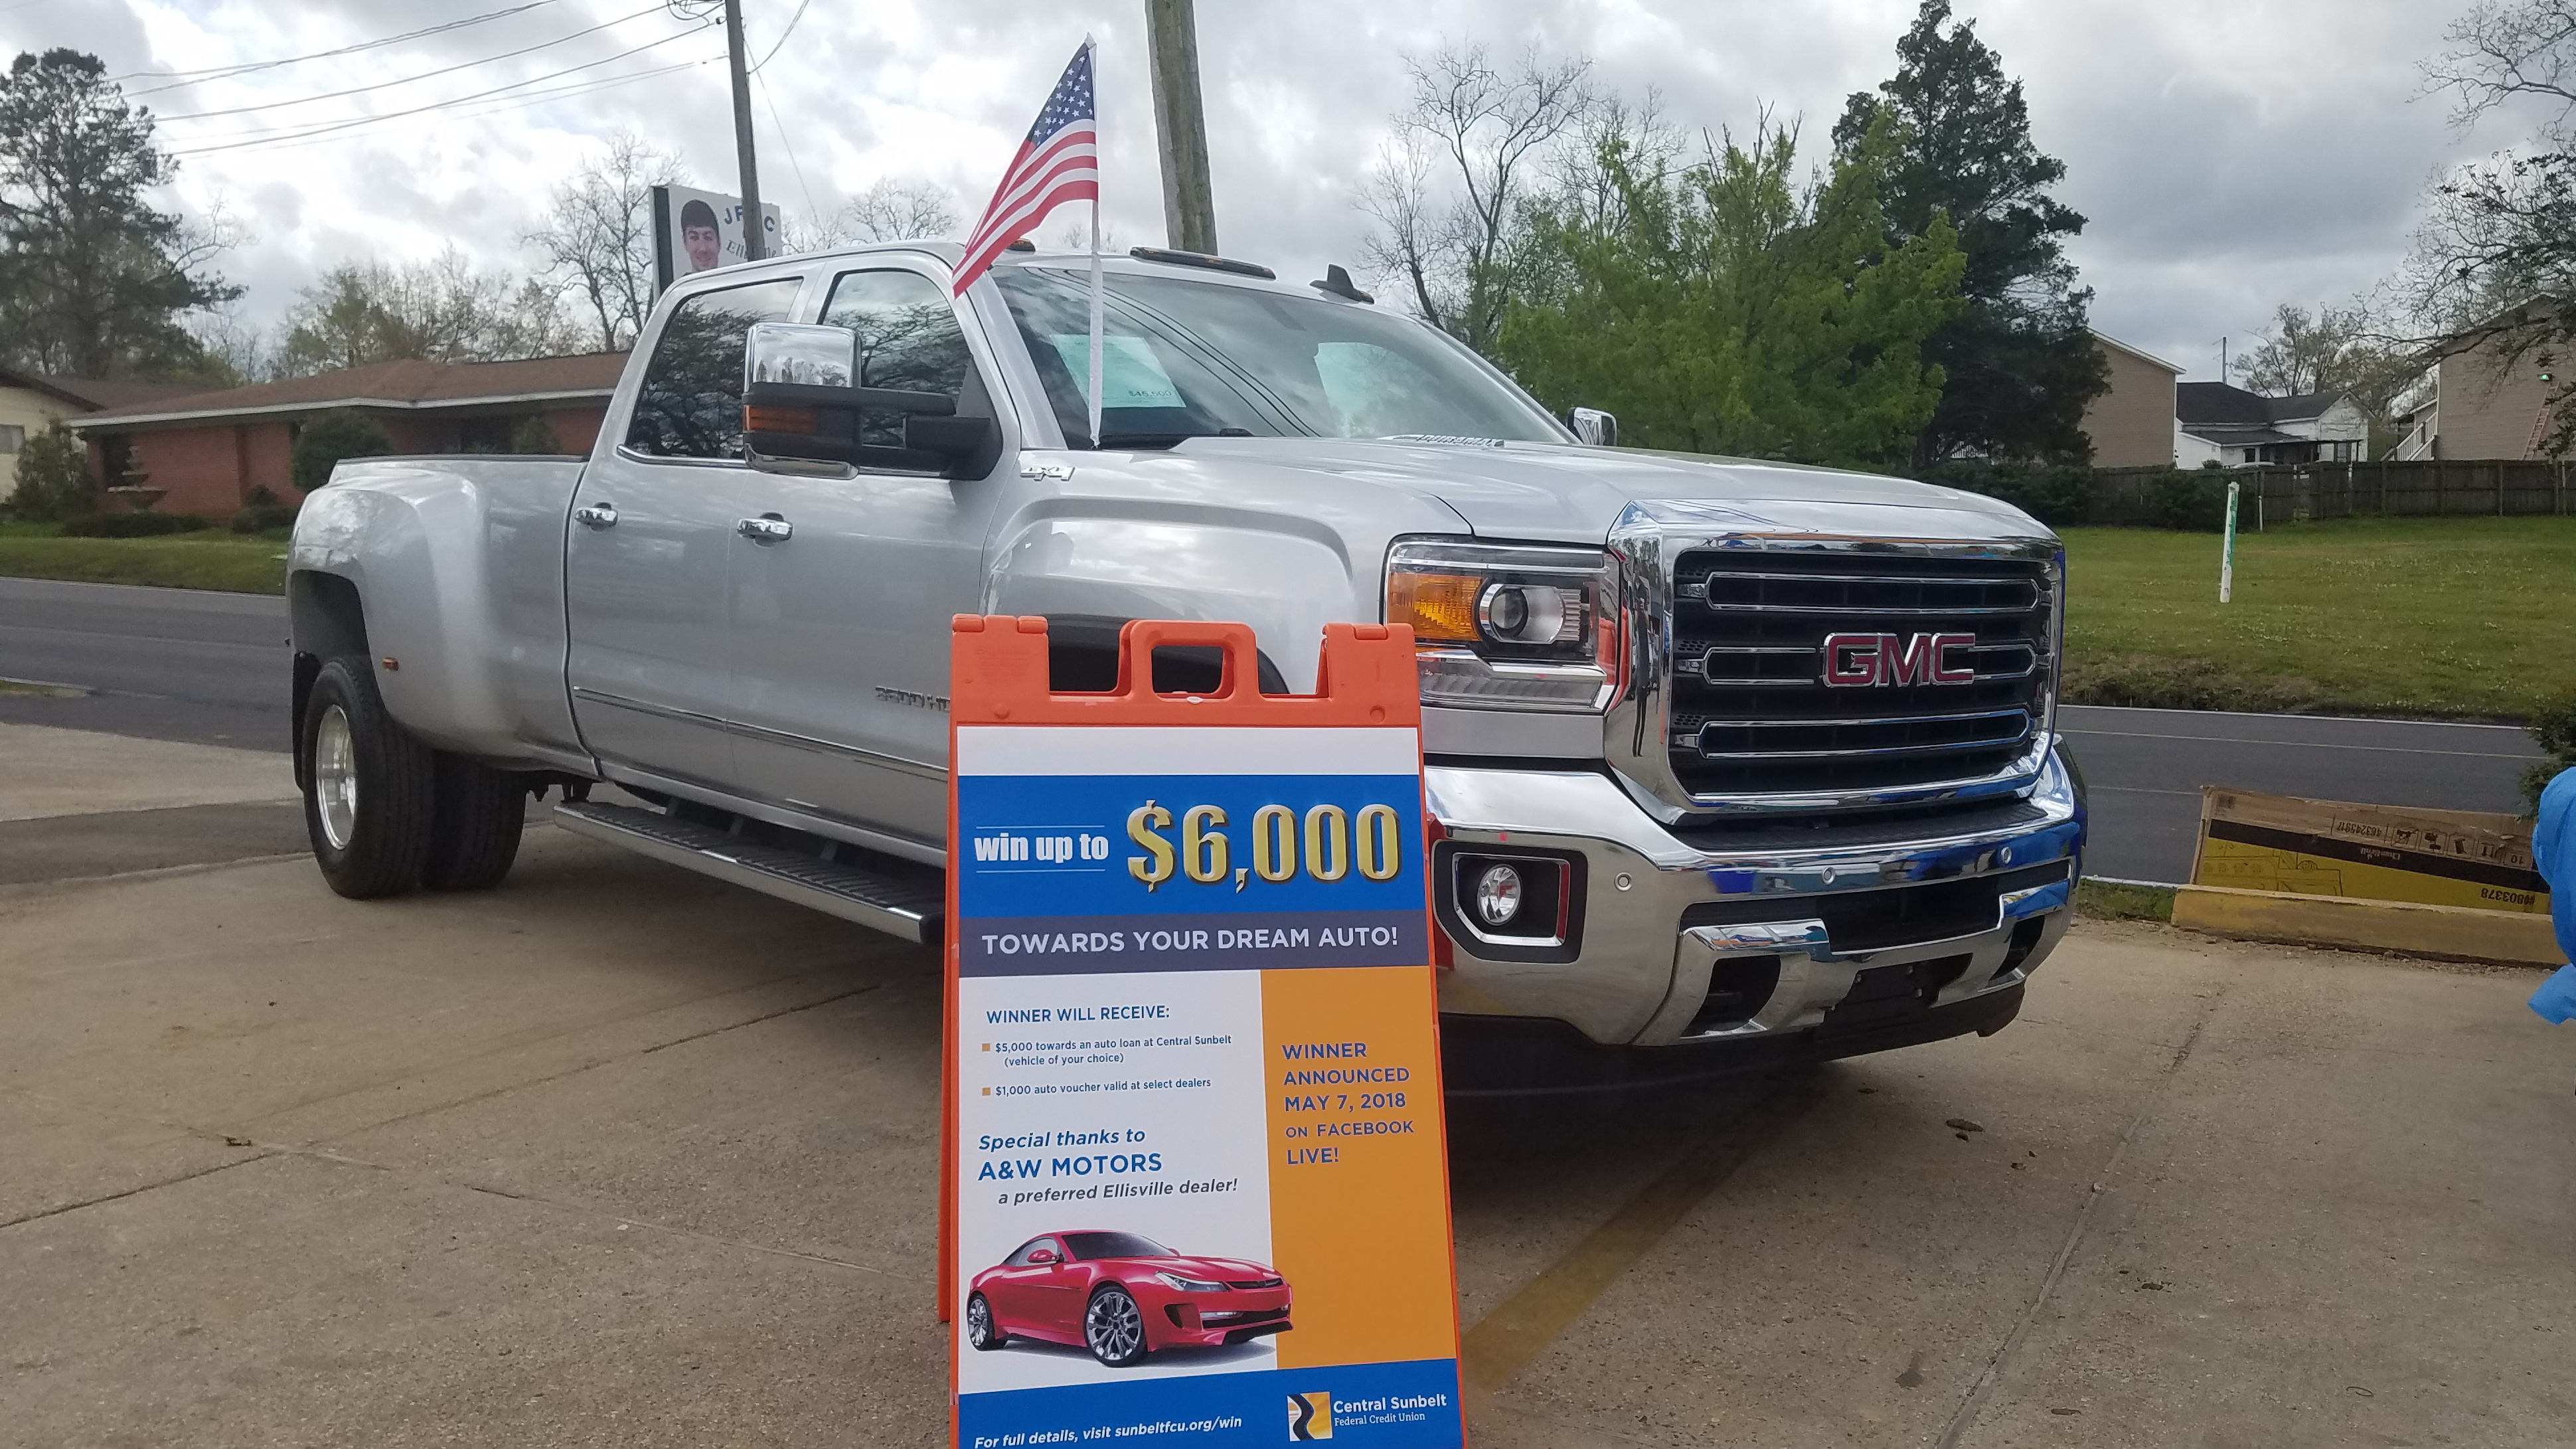 Special thanks to A&W Motors for partnering up for our special auto loan credit giveaway - Ellisville Branch Grand Opening - Central Sunbelt